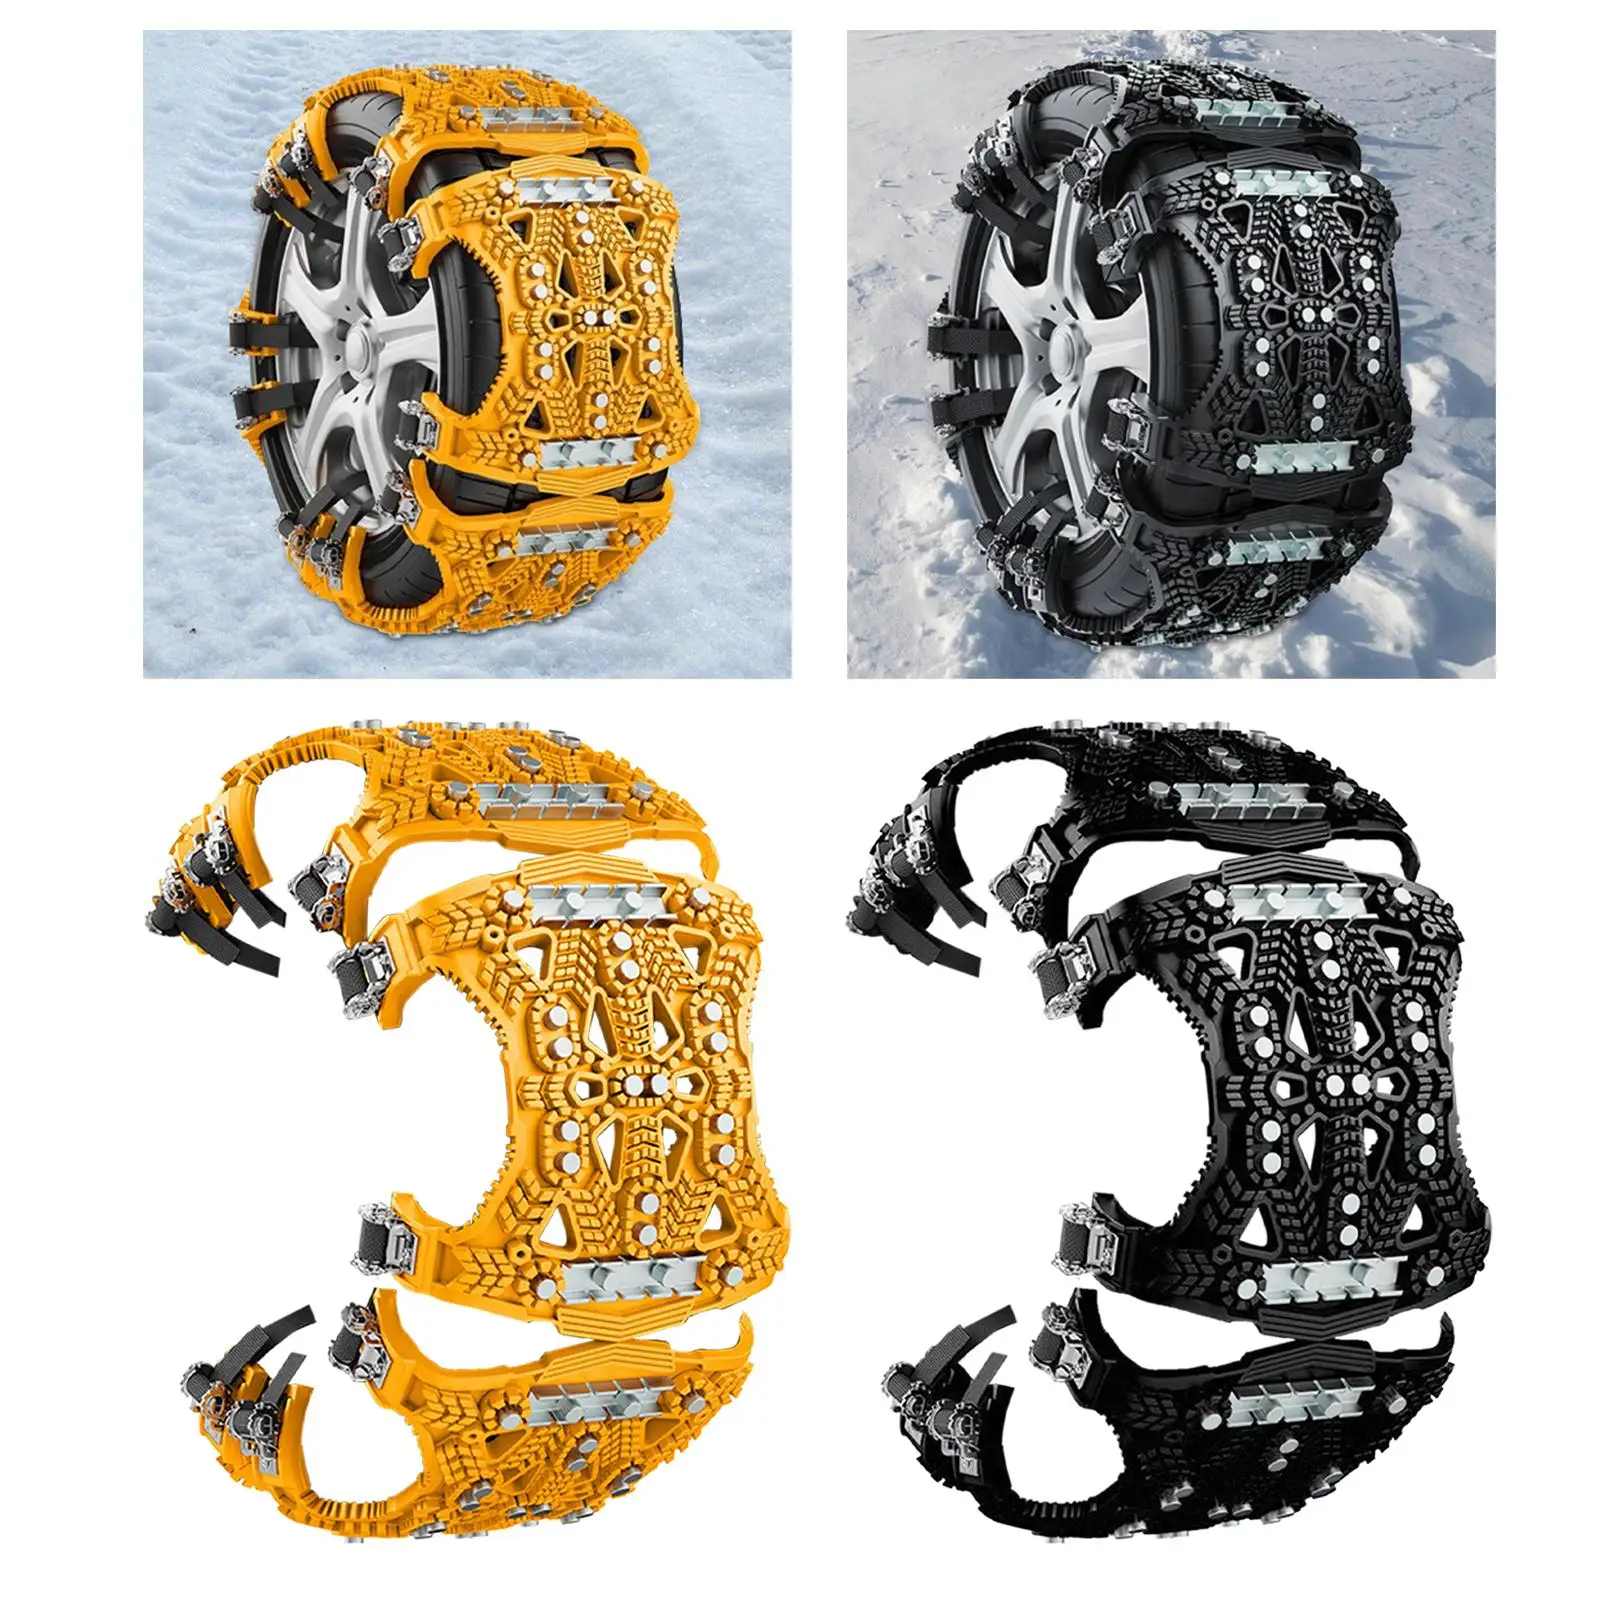 Car Tyres Anti Slip Snow Chain Emergency Accessory for Climbing Road